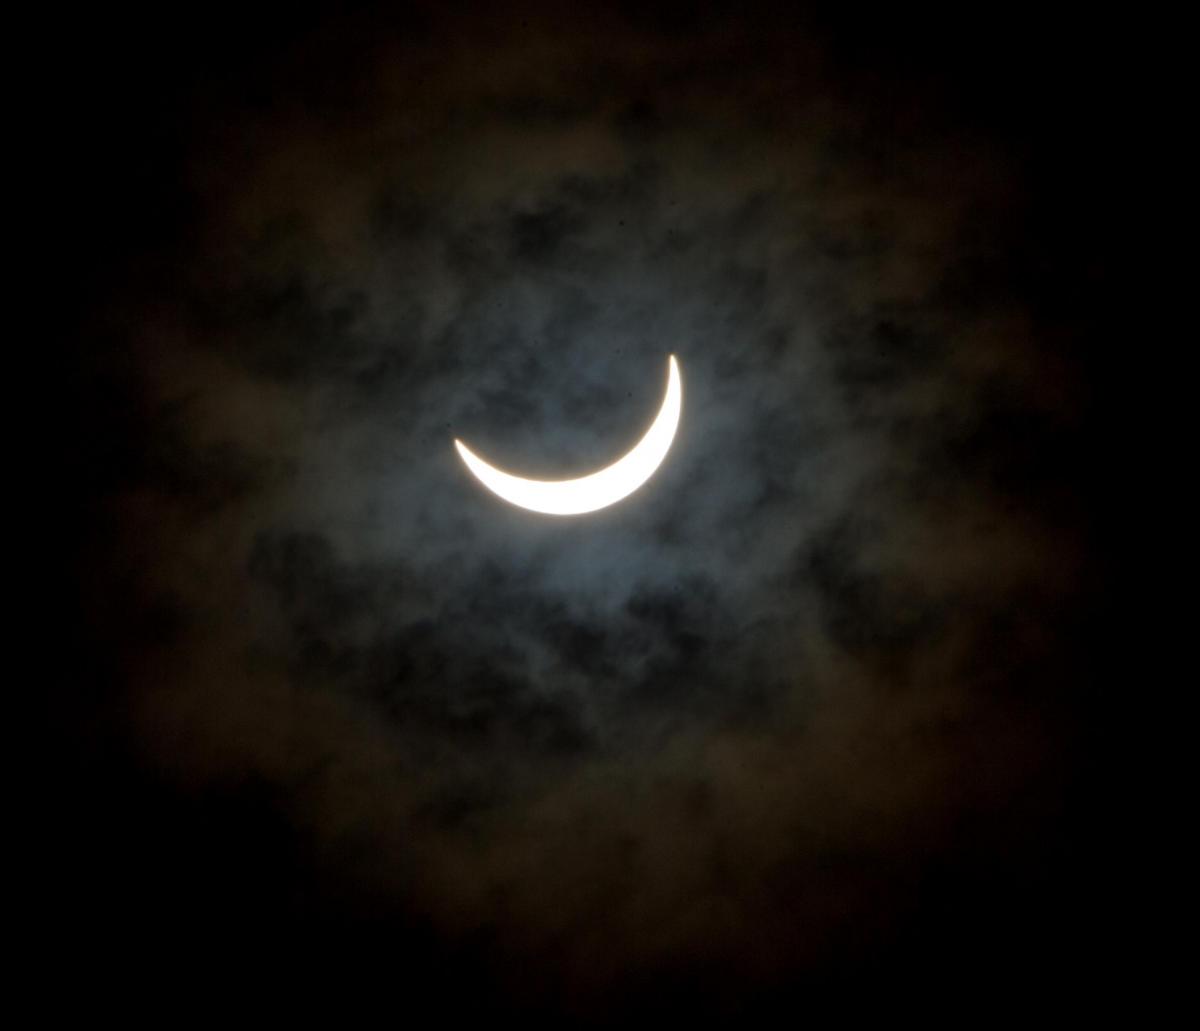 The eclipse from Abingdon